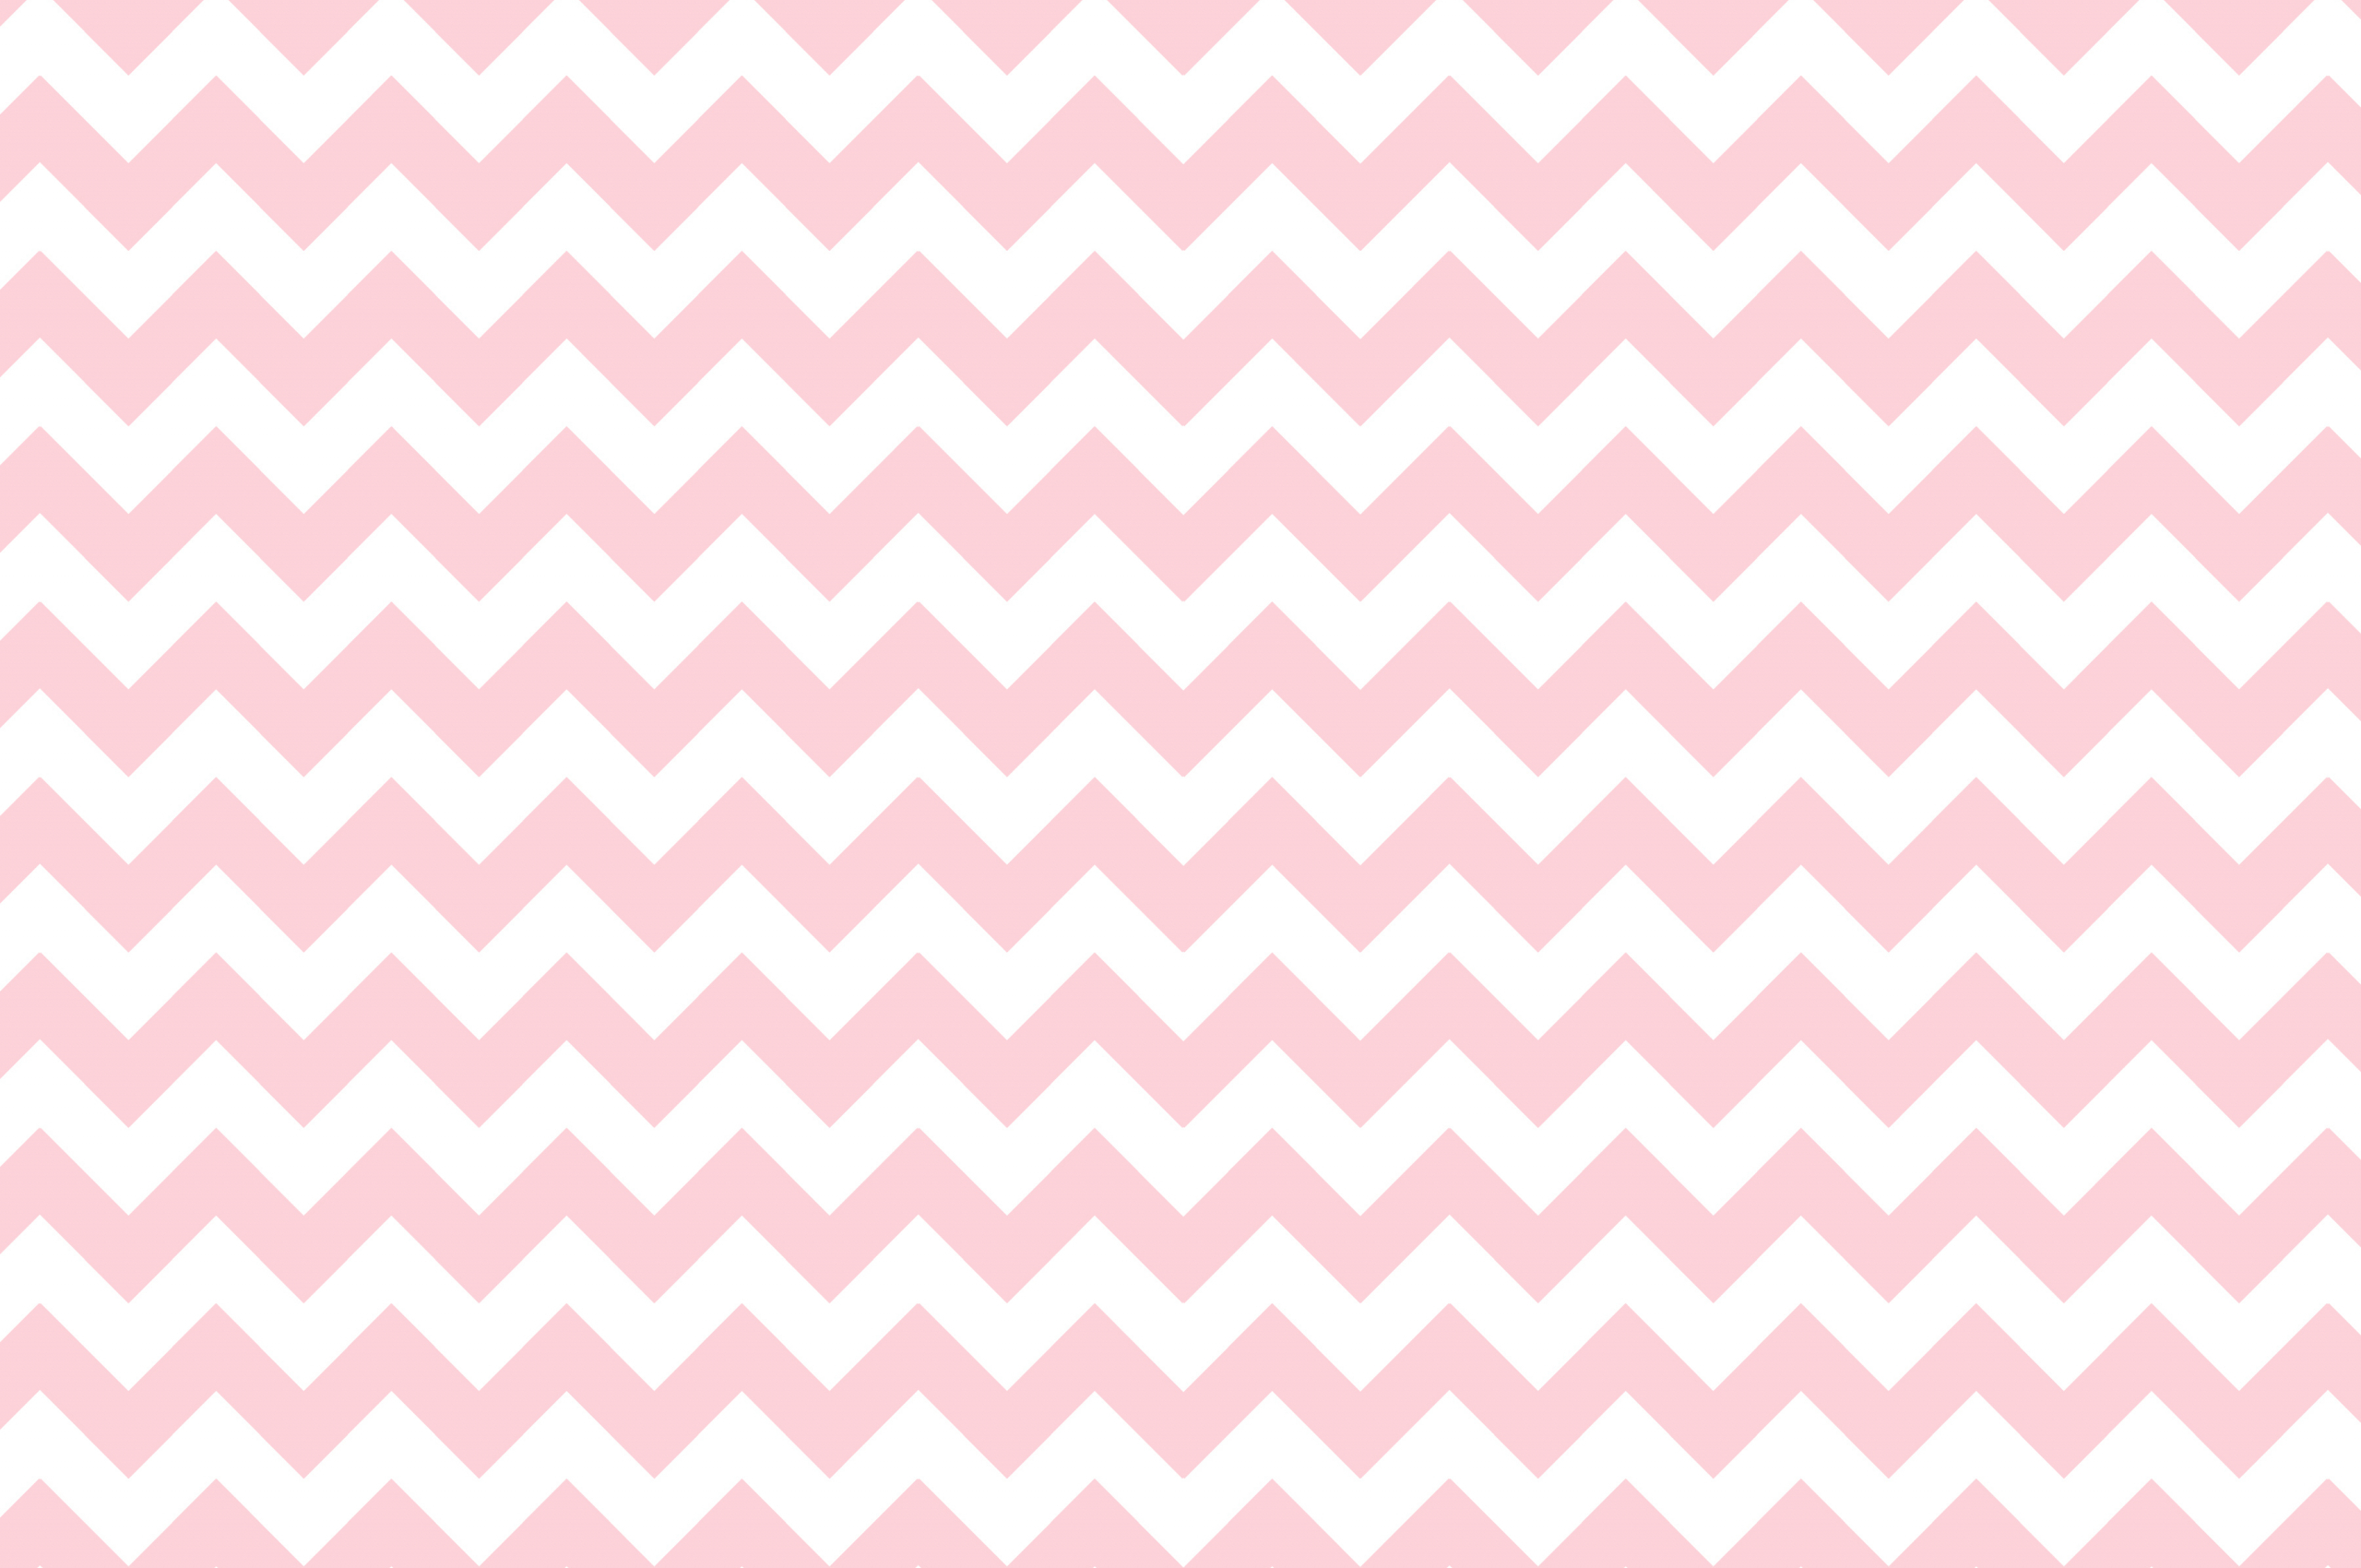 2560x1700 Pink And White Chevron Wallpaper on Sale, 55% OFF